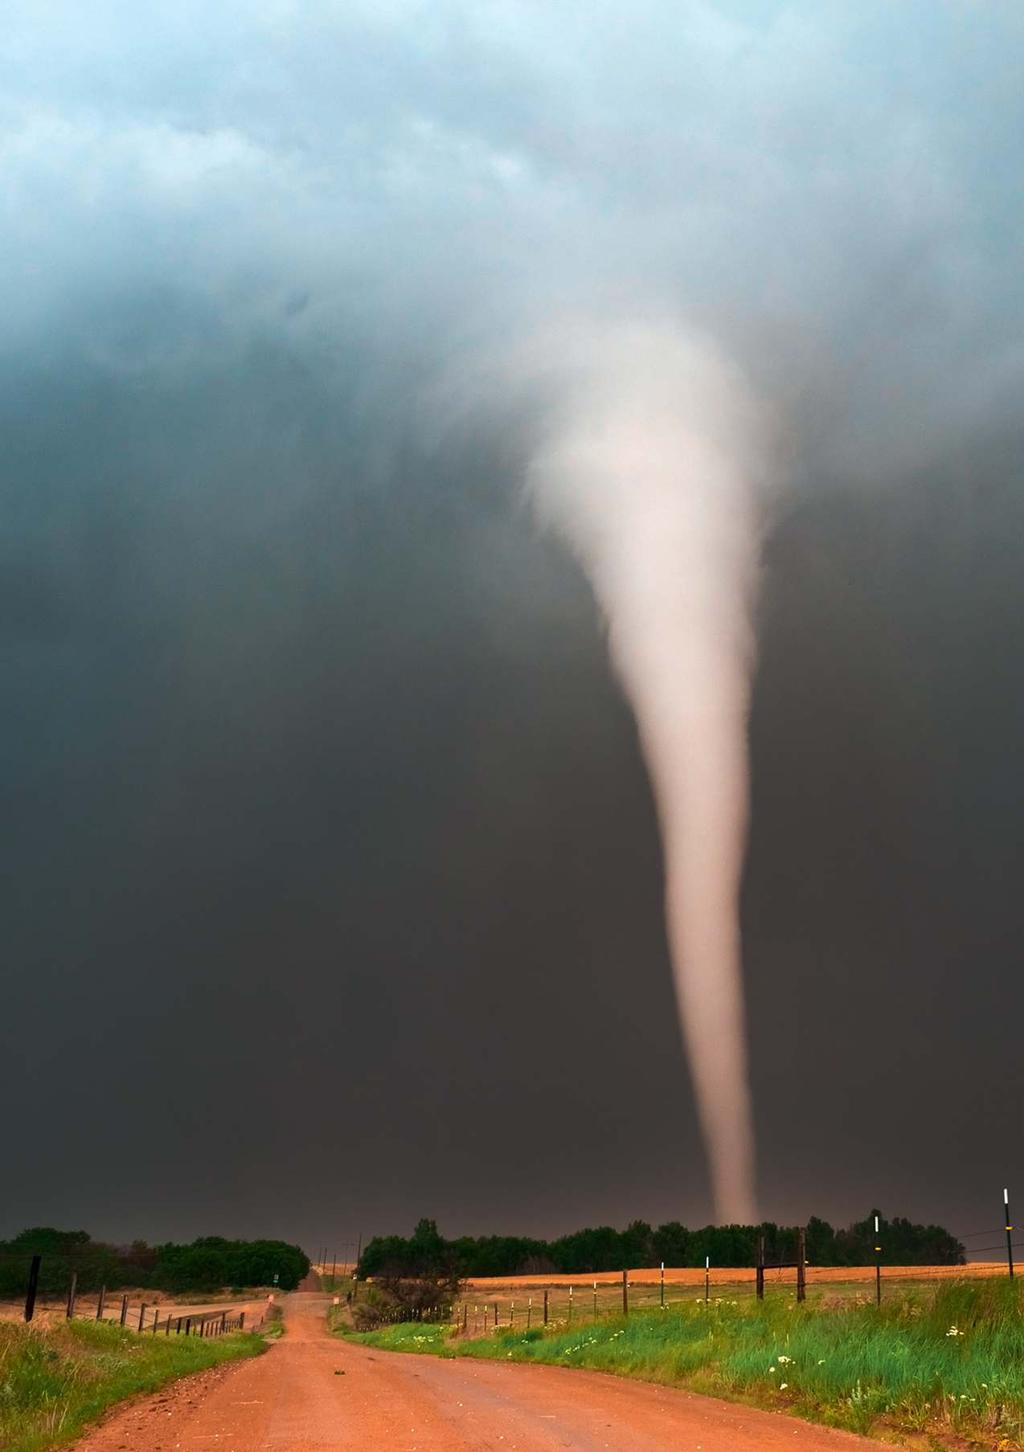 Cambridge University Press Home Stories Music Movies Chat CHASING THE STORMS Tornadoes bring heavy rain and terrible winds the strongest tornadoes travel at 400 kilometers per hour and are 80